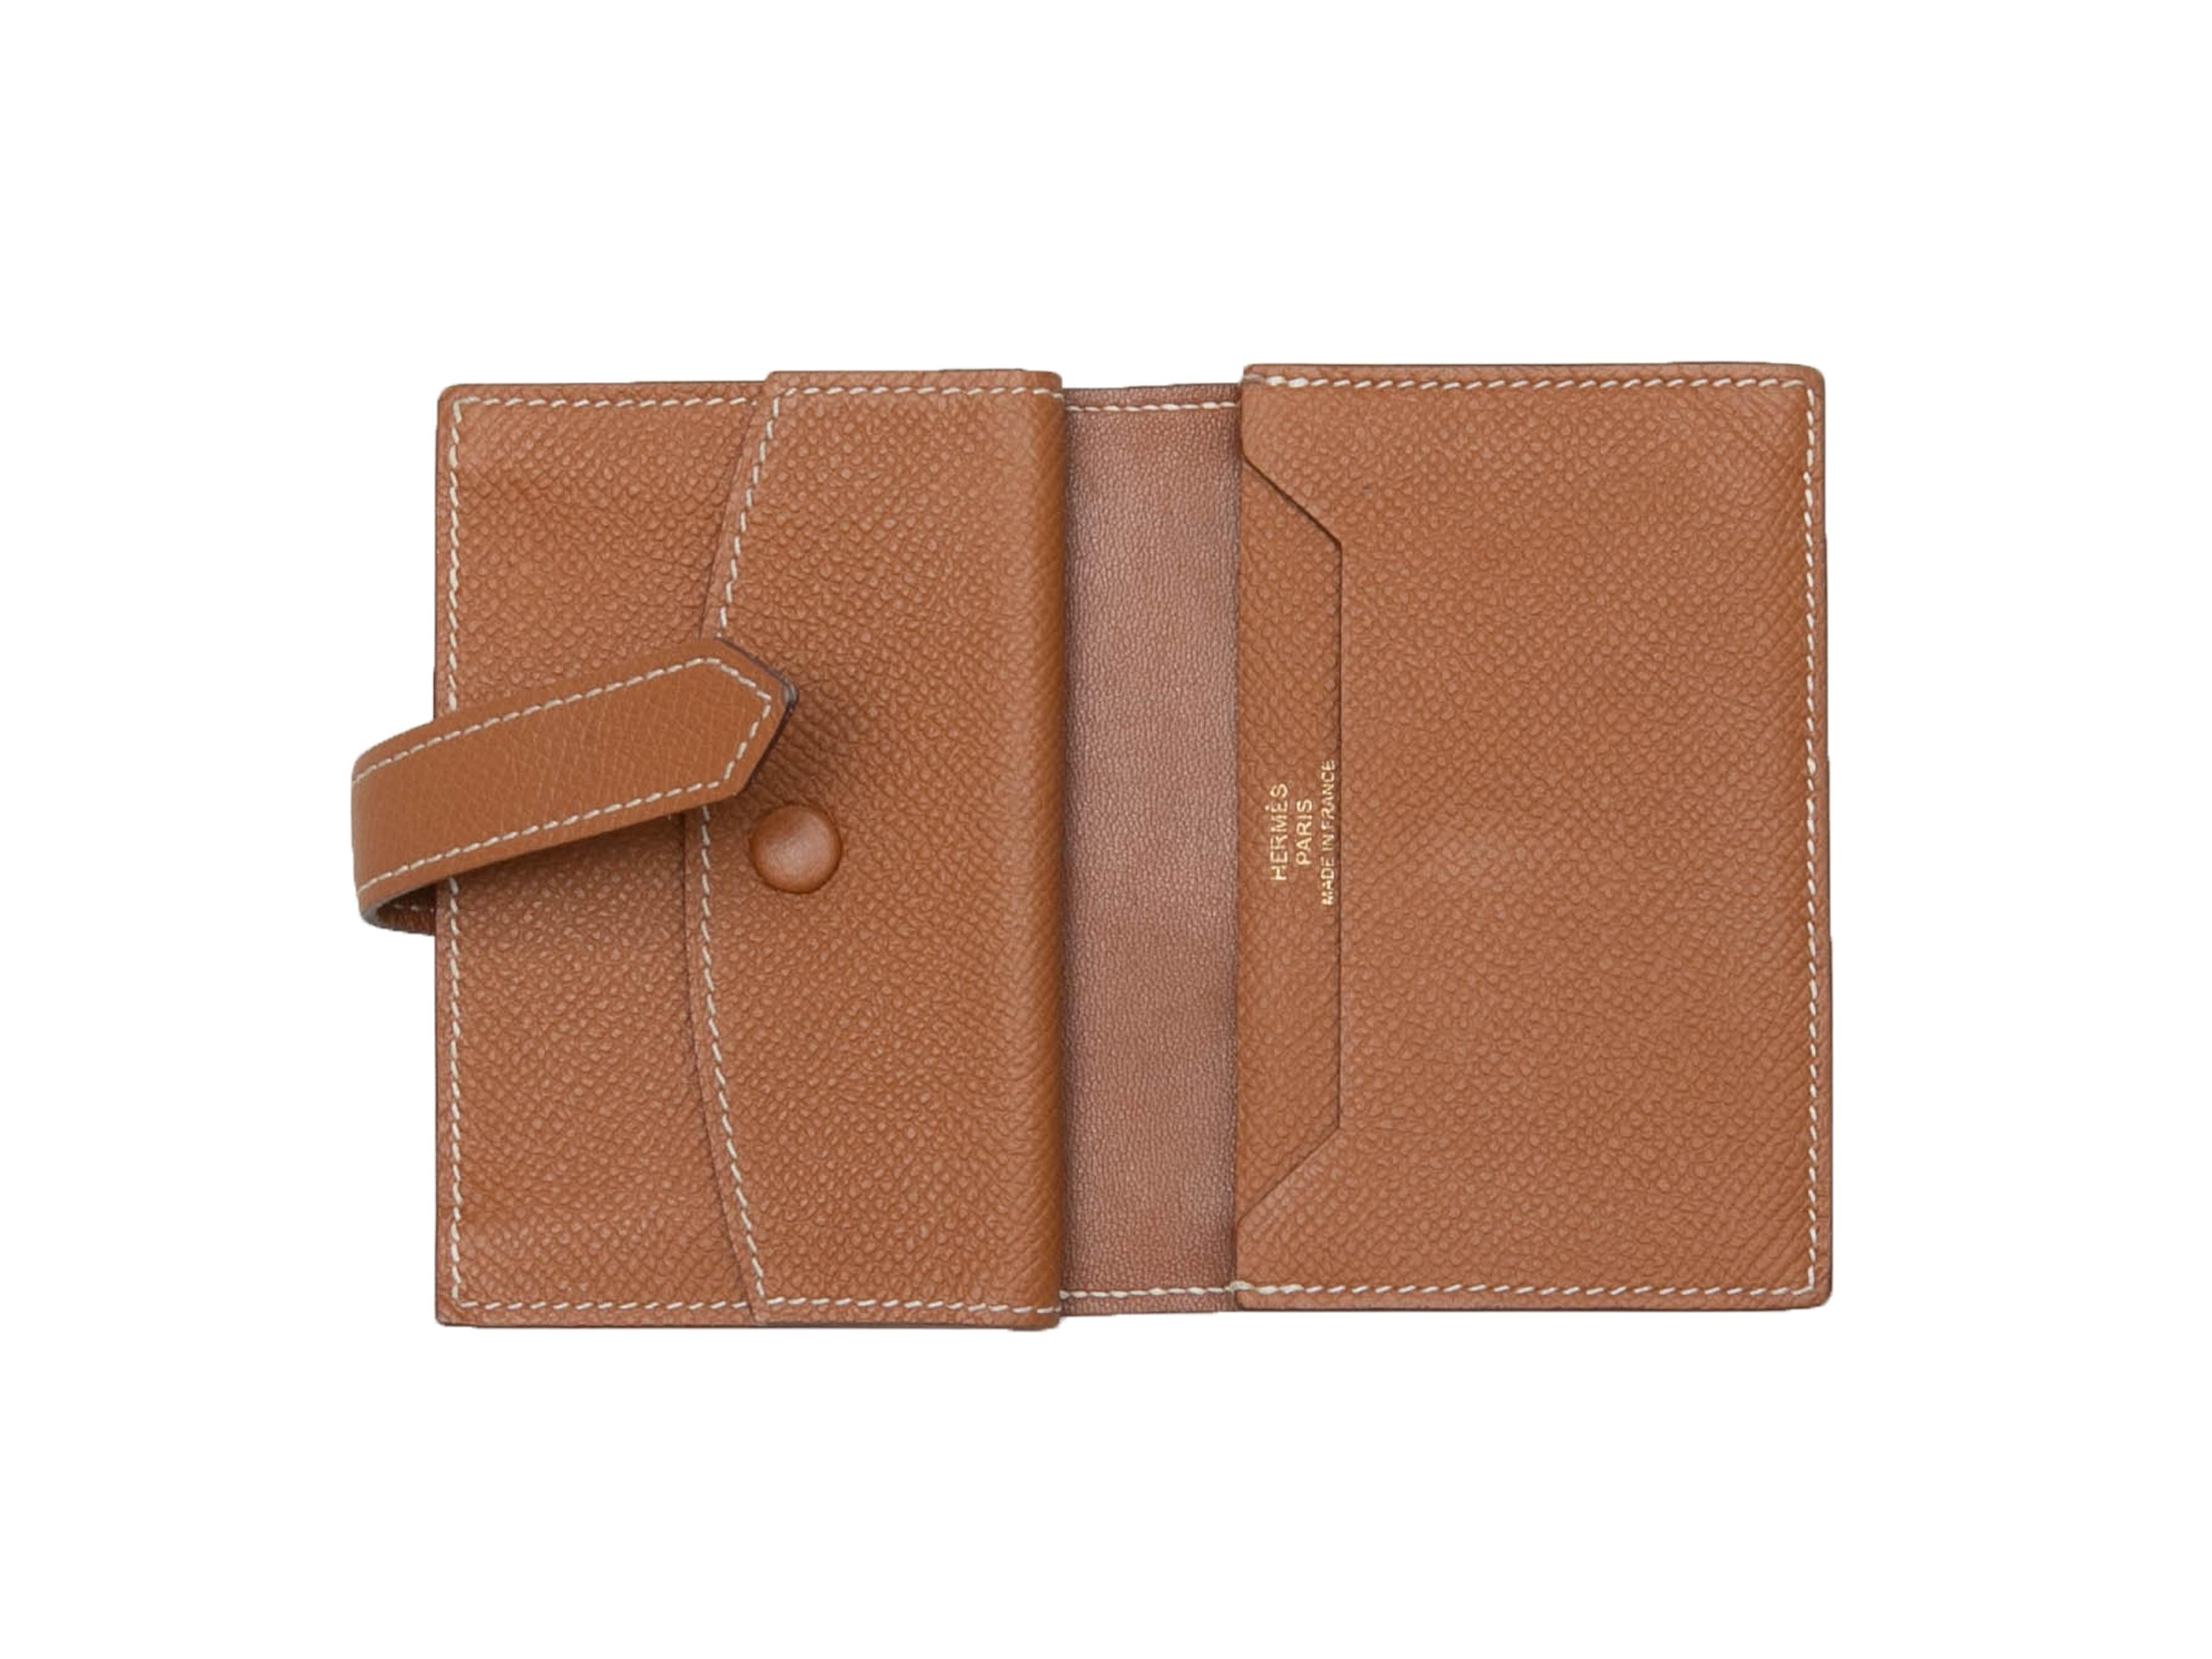 Tan Hermes Mini Bearn Wallet In Good Condition For Sale In New York, NY